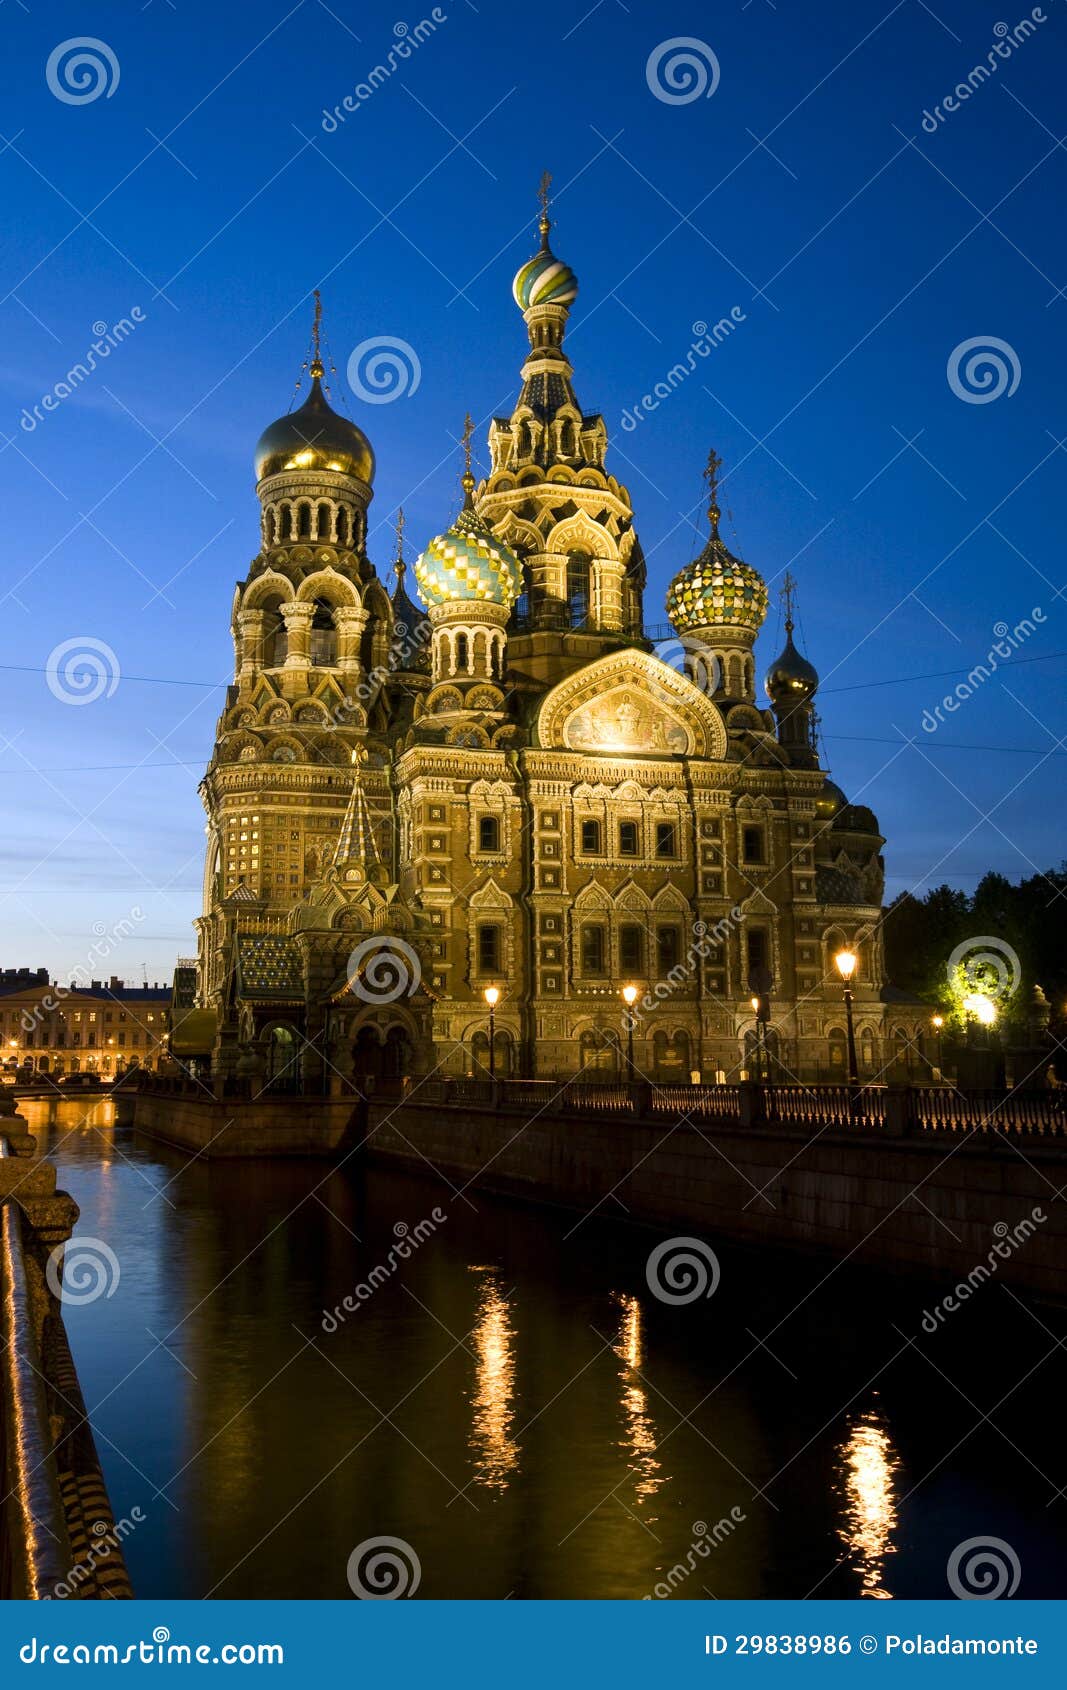 cathedral of christ the saviour in st petersburg, russia